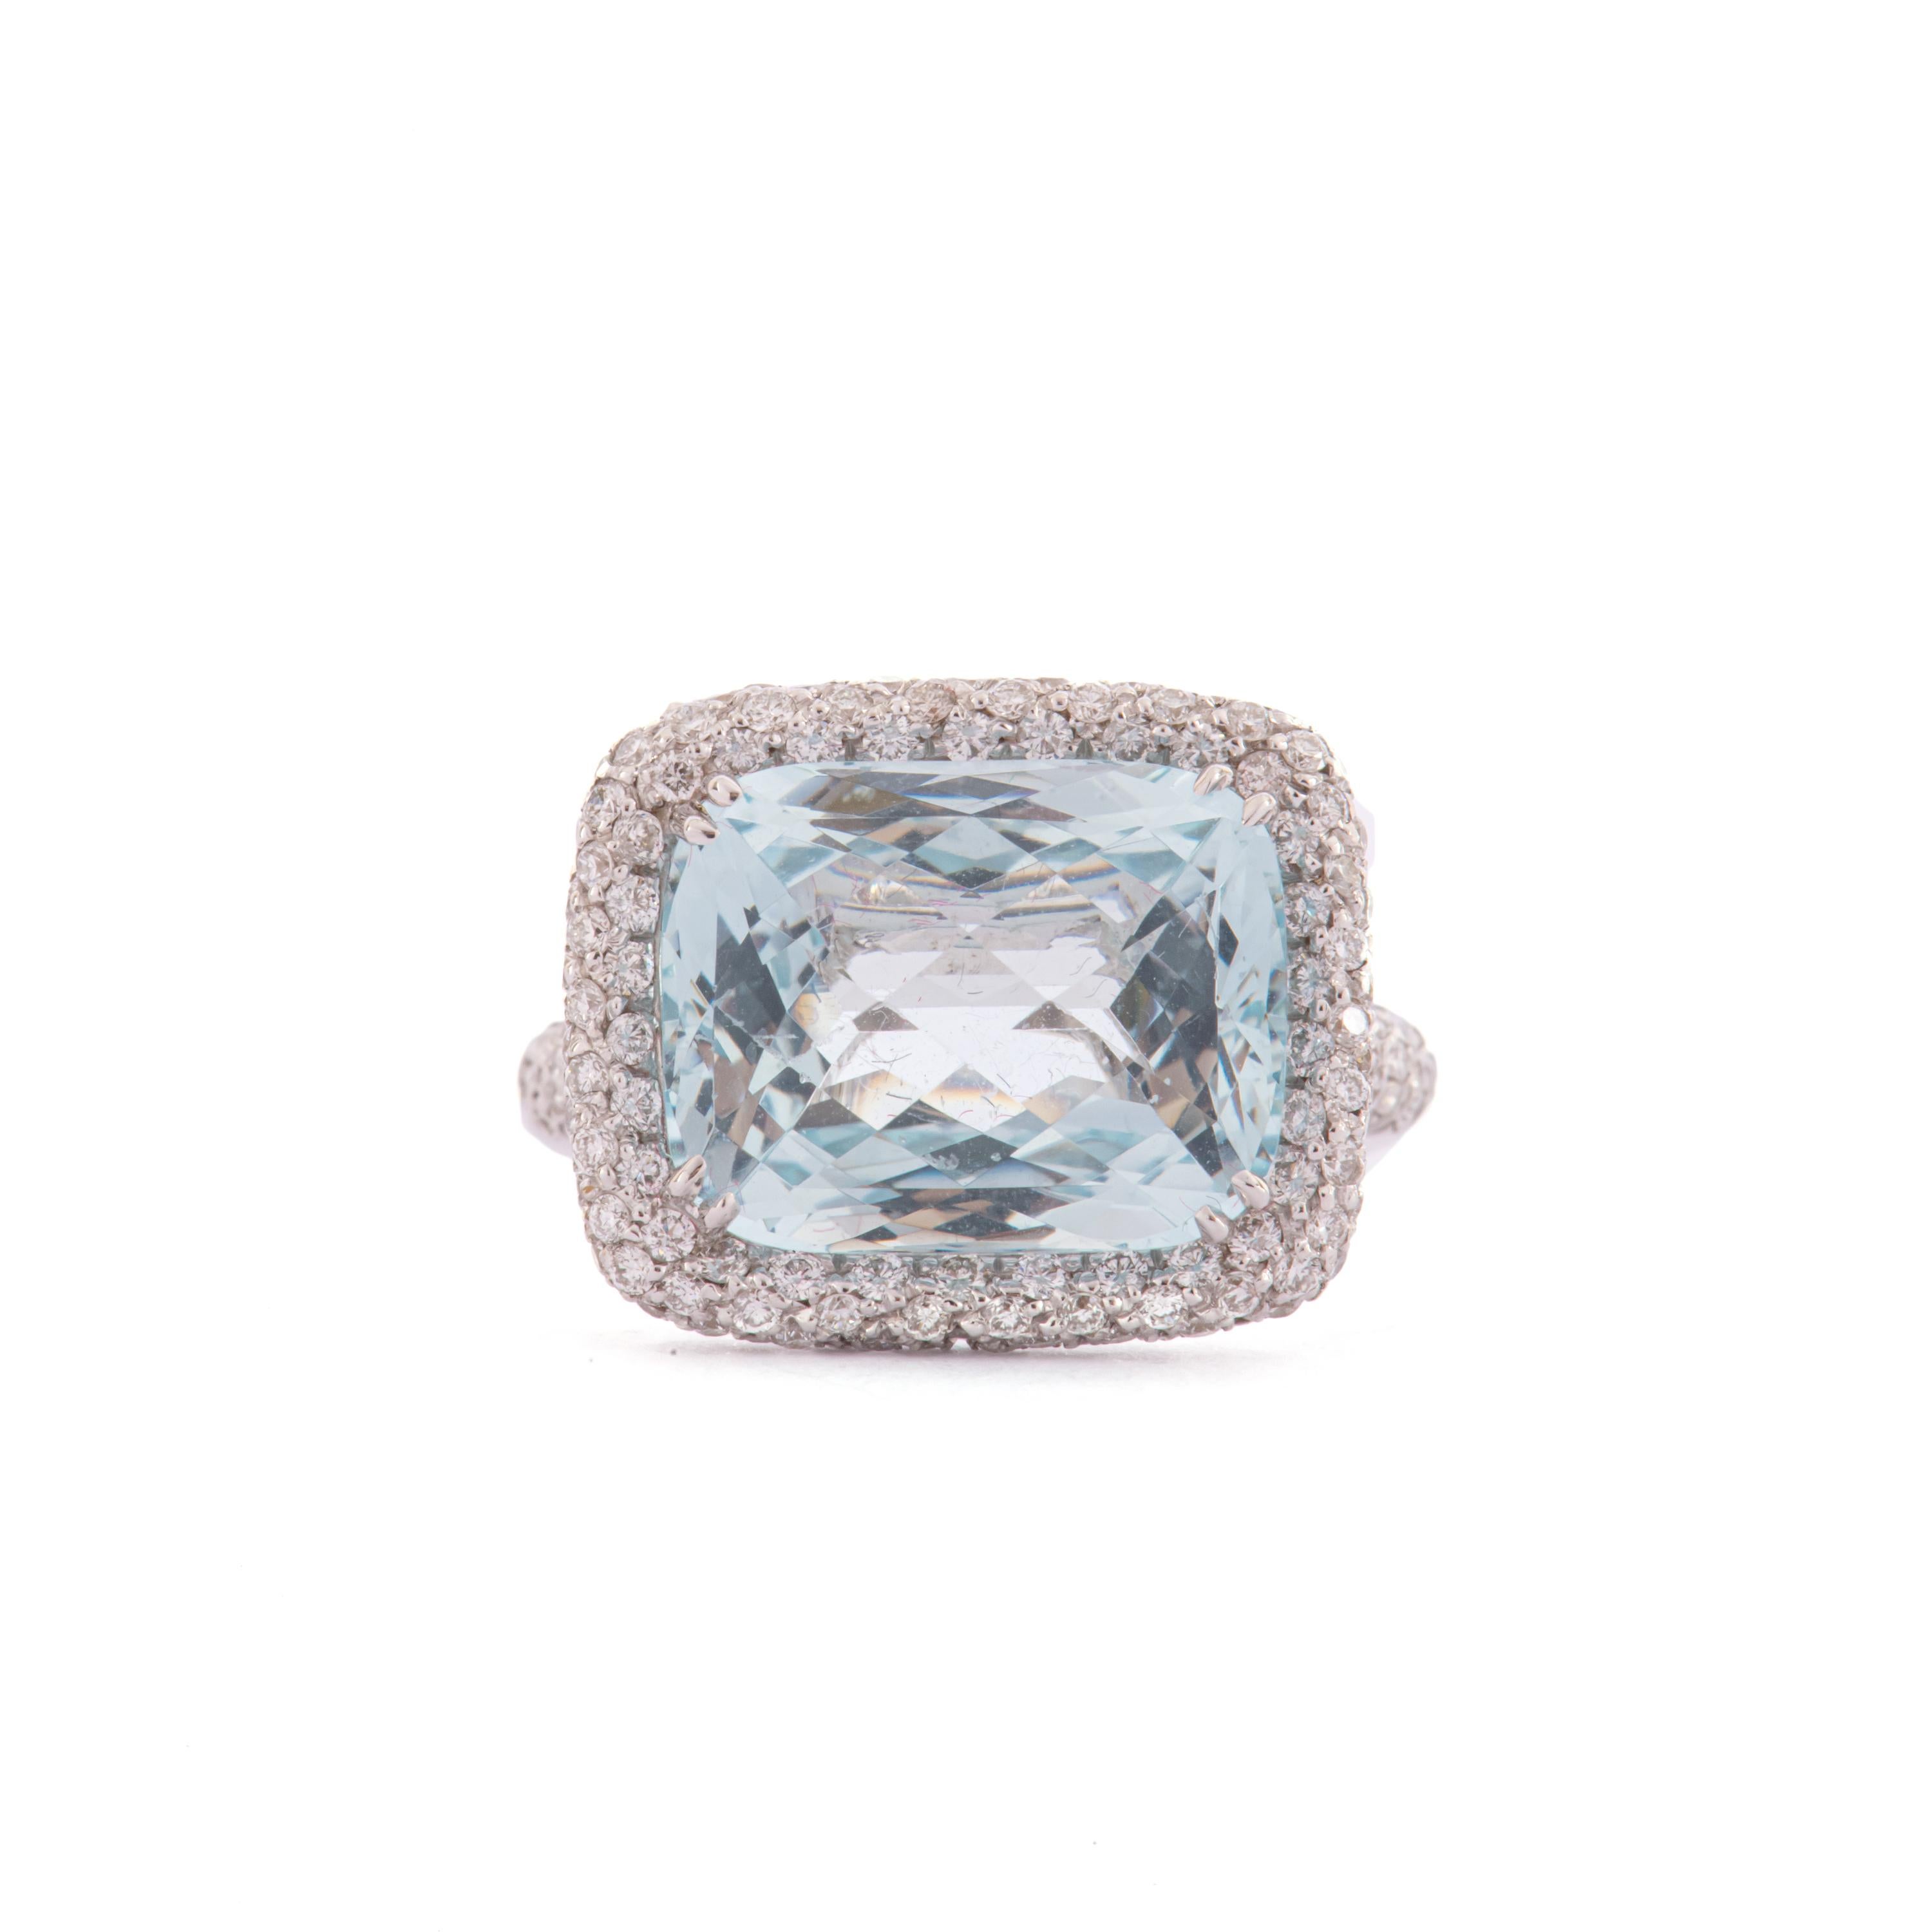 This lovely 18 kt. White gold ring with aquamarine ct. 7.97 and diamonds ct. 1.37 features a deep blue 7,97 carat aquamarine surrounded by 1,37 carats of brilliant white diamonds. Ideal for any moment of fashion, the look of this ring is perfectly